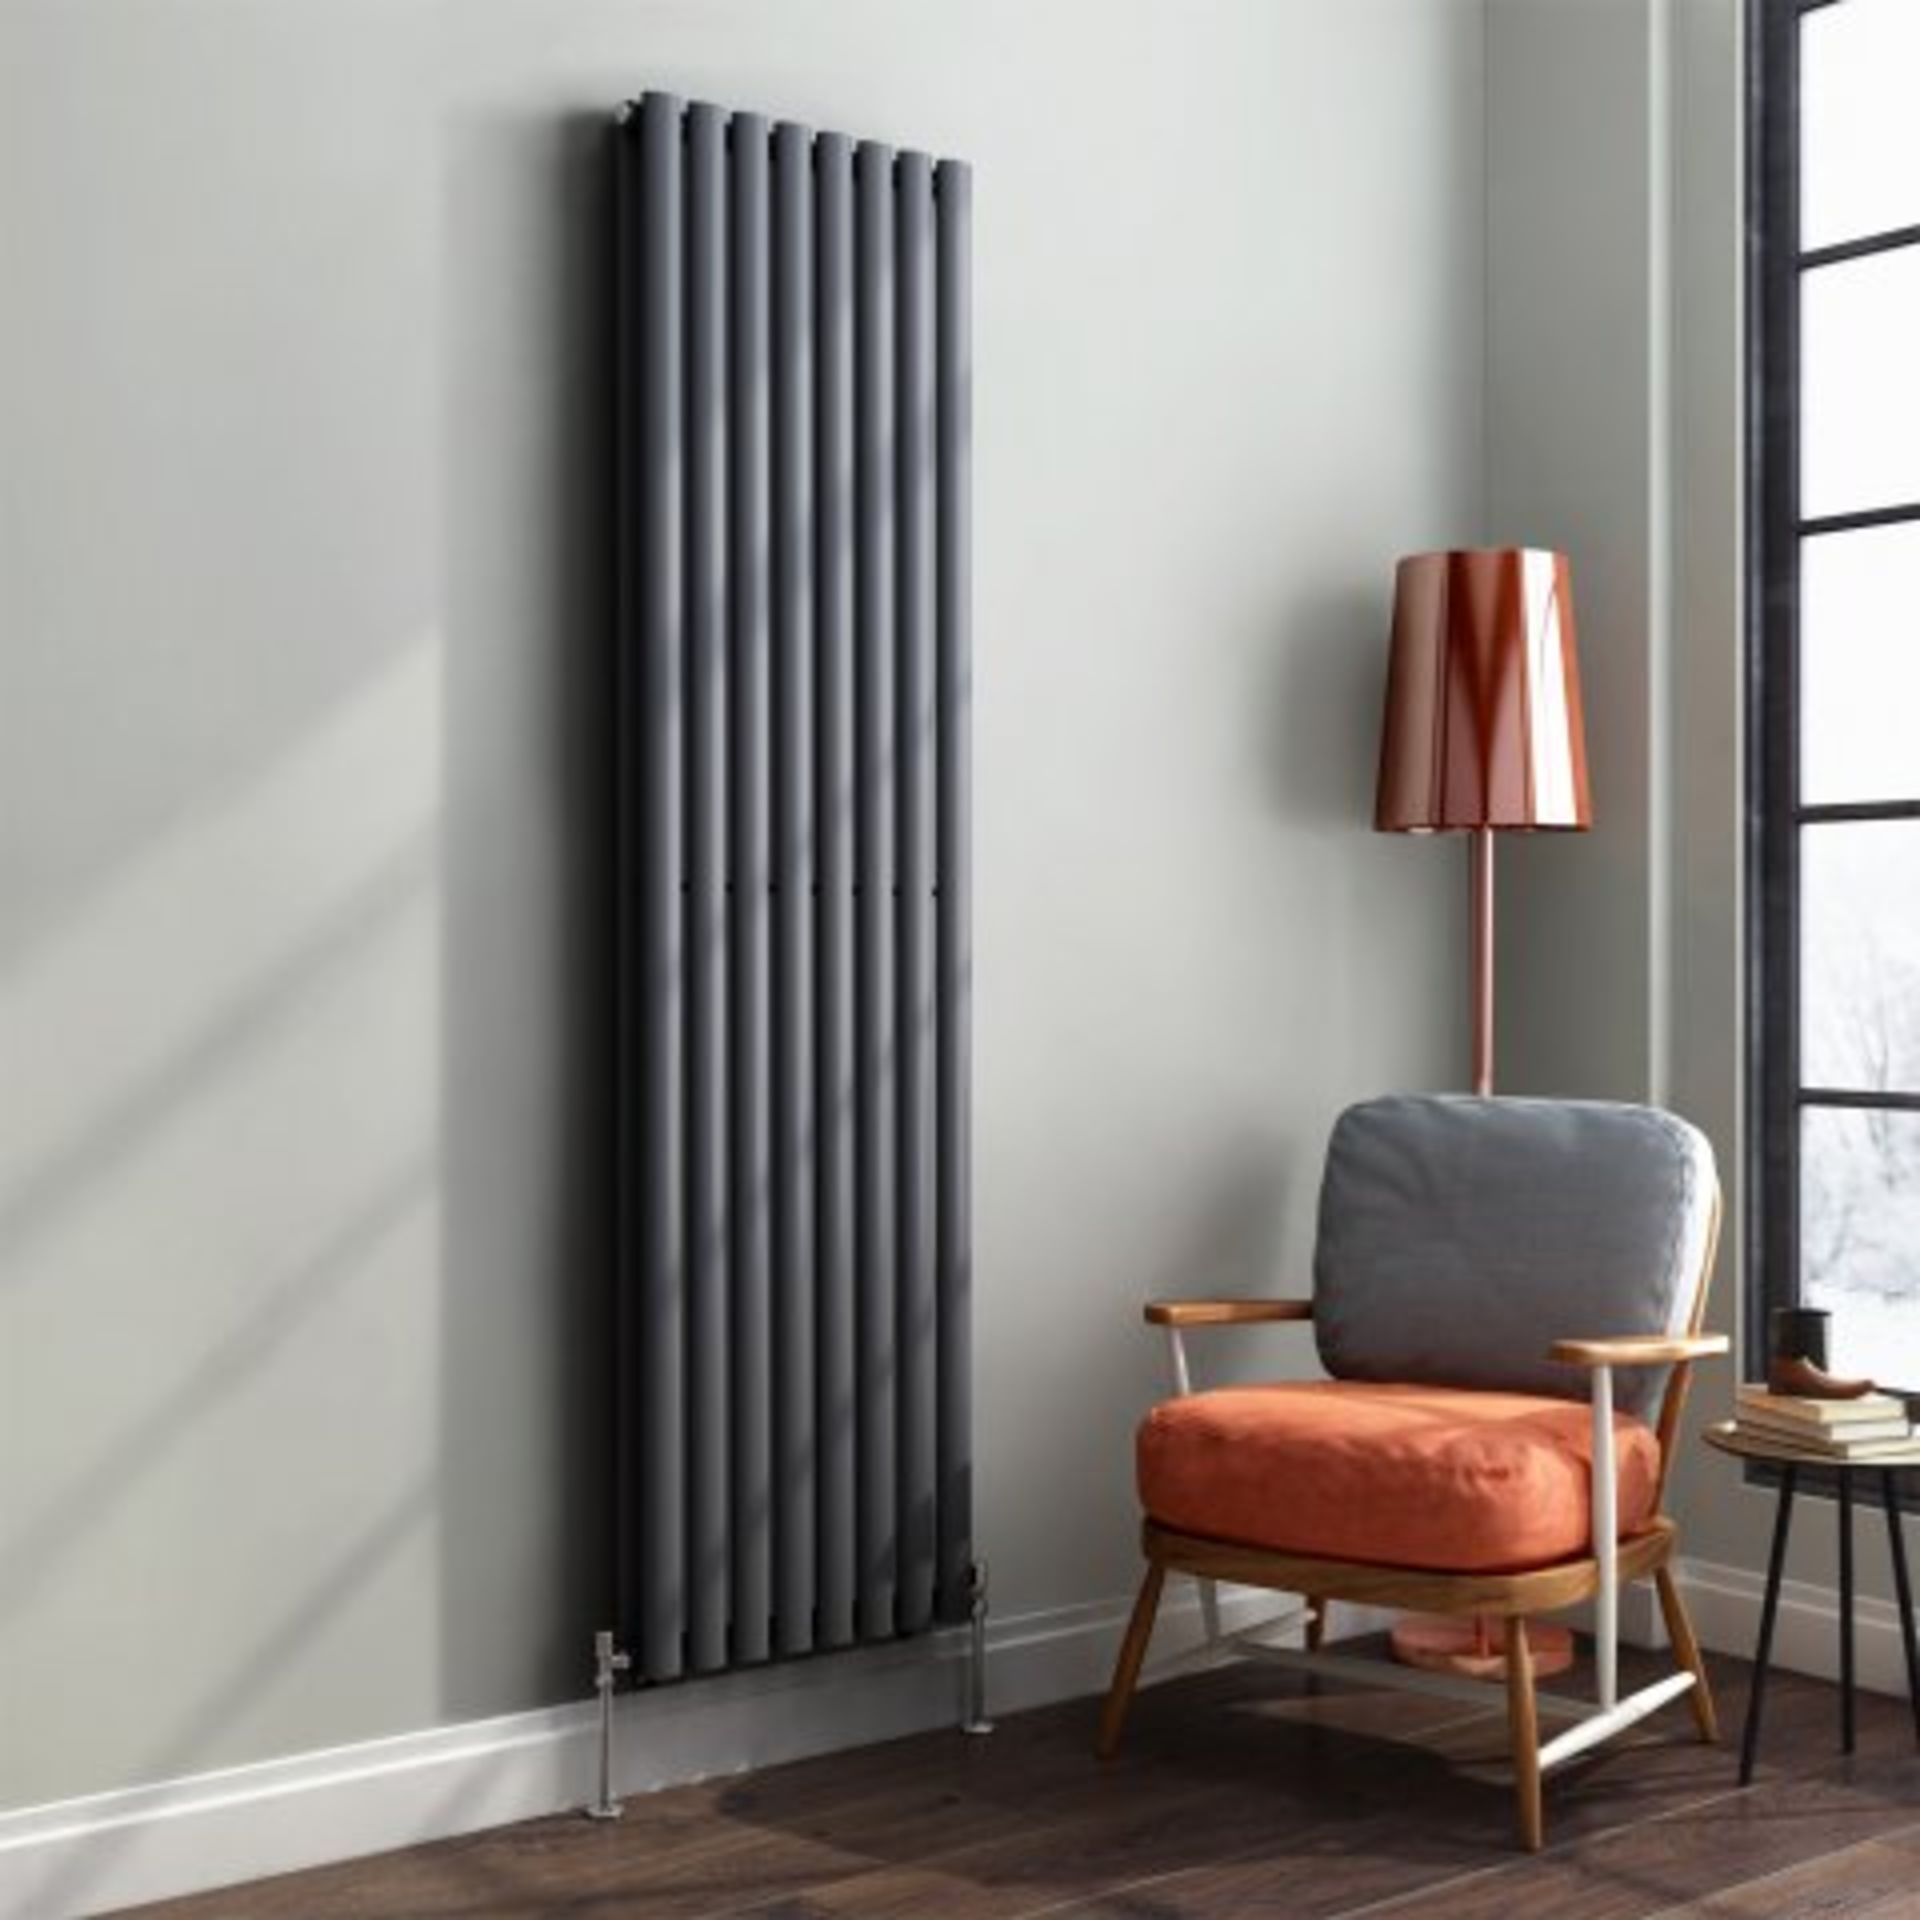 (K73) 1800x480mm Anthracite Double Oval Tube Vertical Radiator - Ember Premium. RRP £319.99. - Image 2 of 5